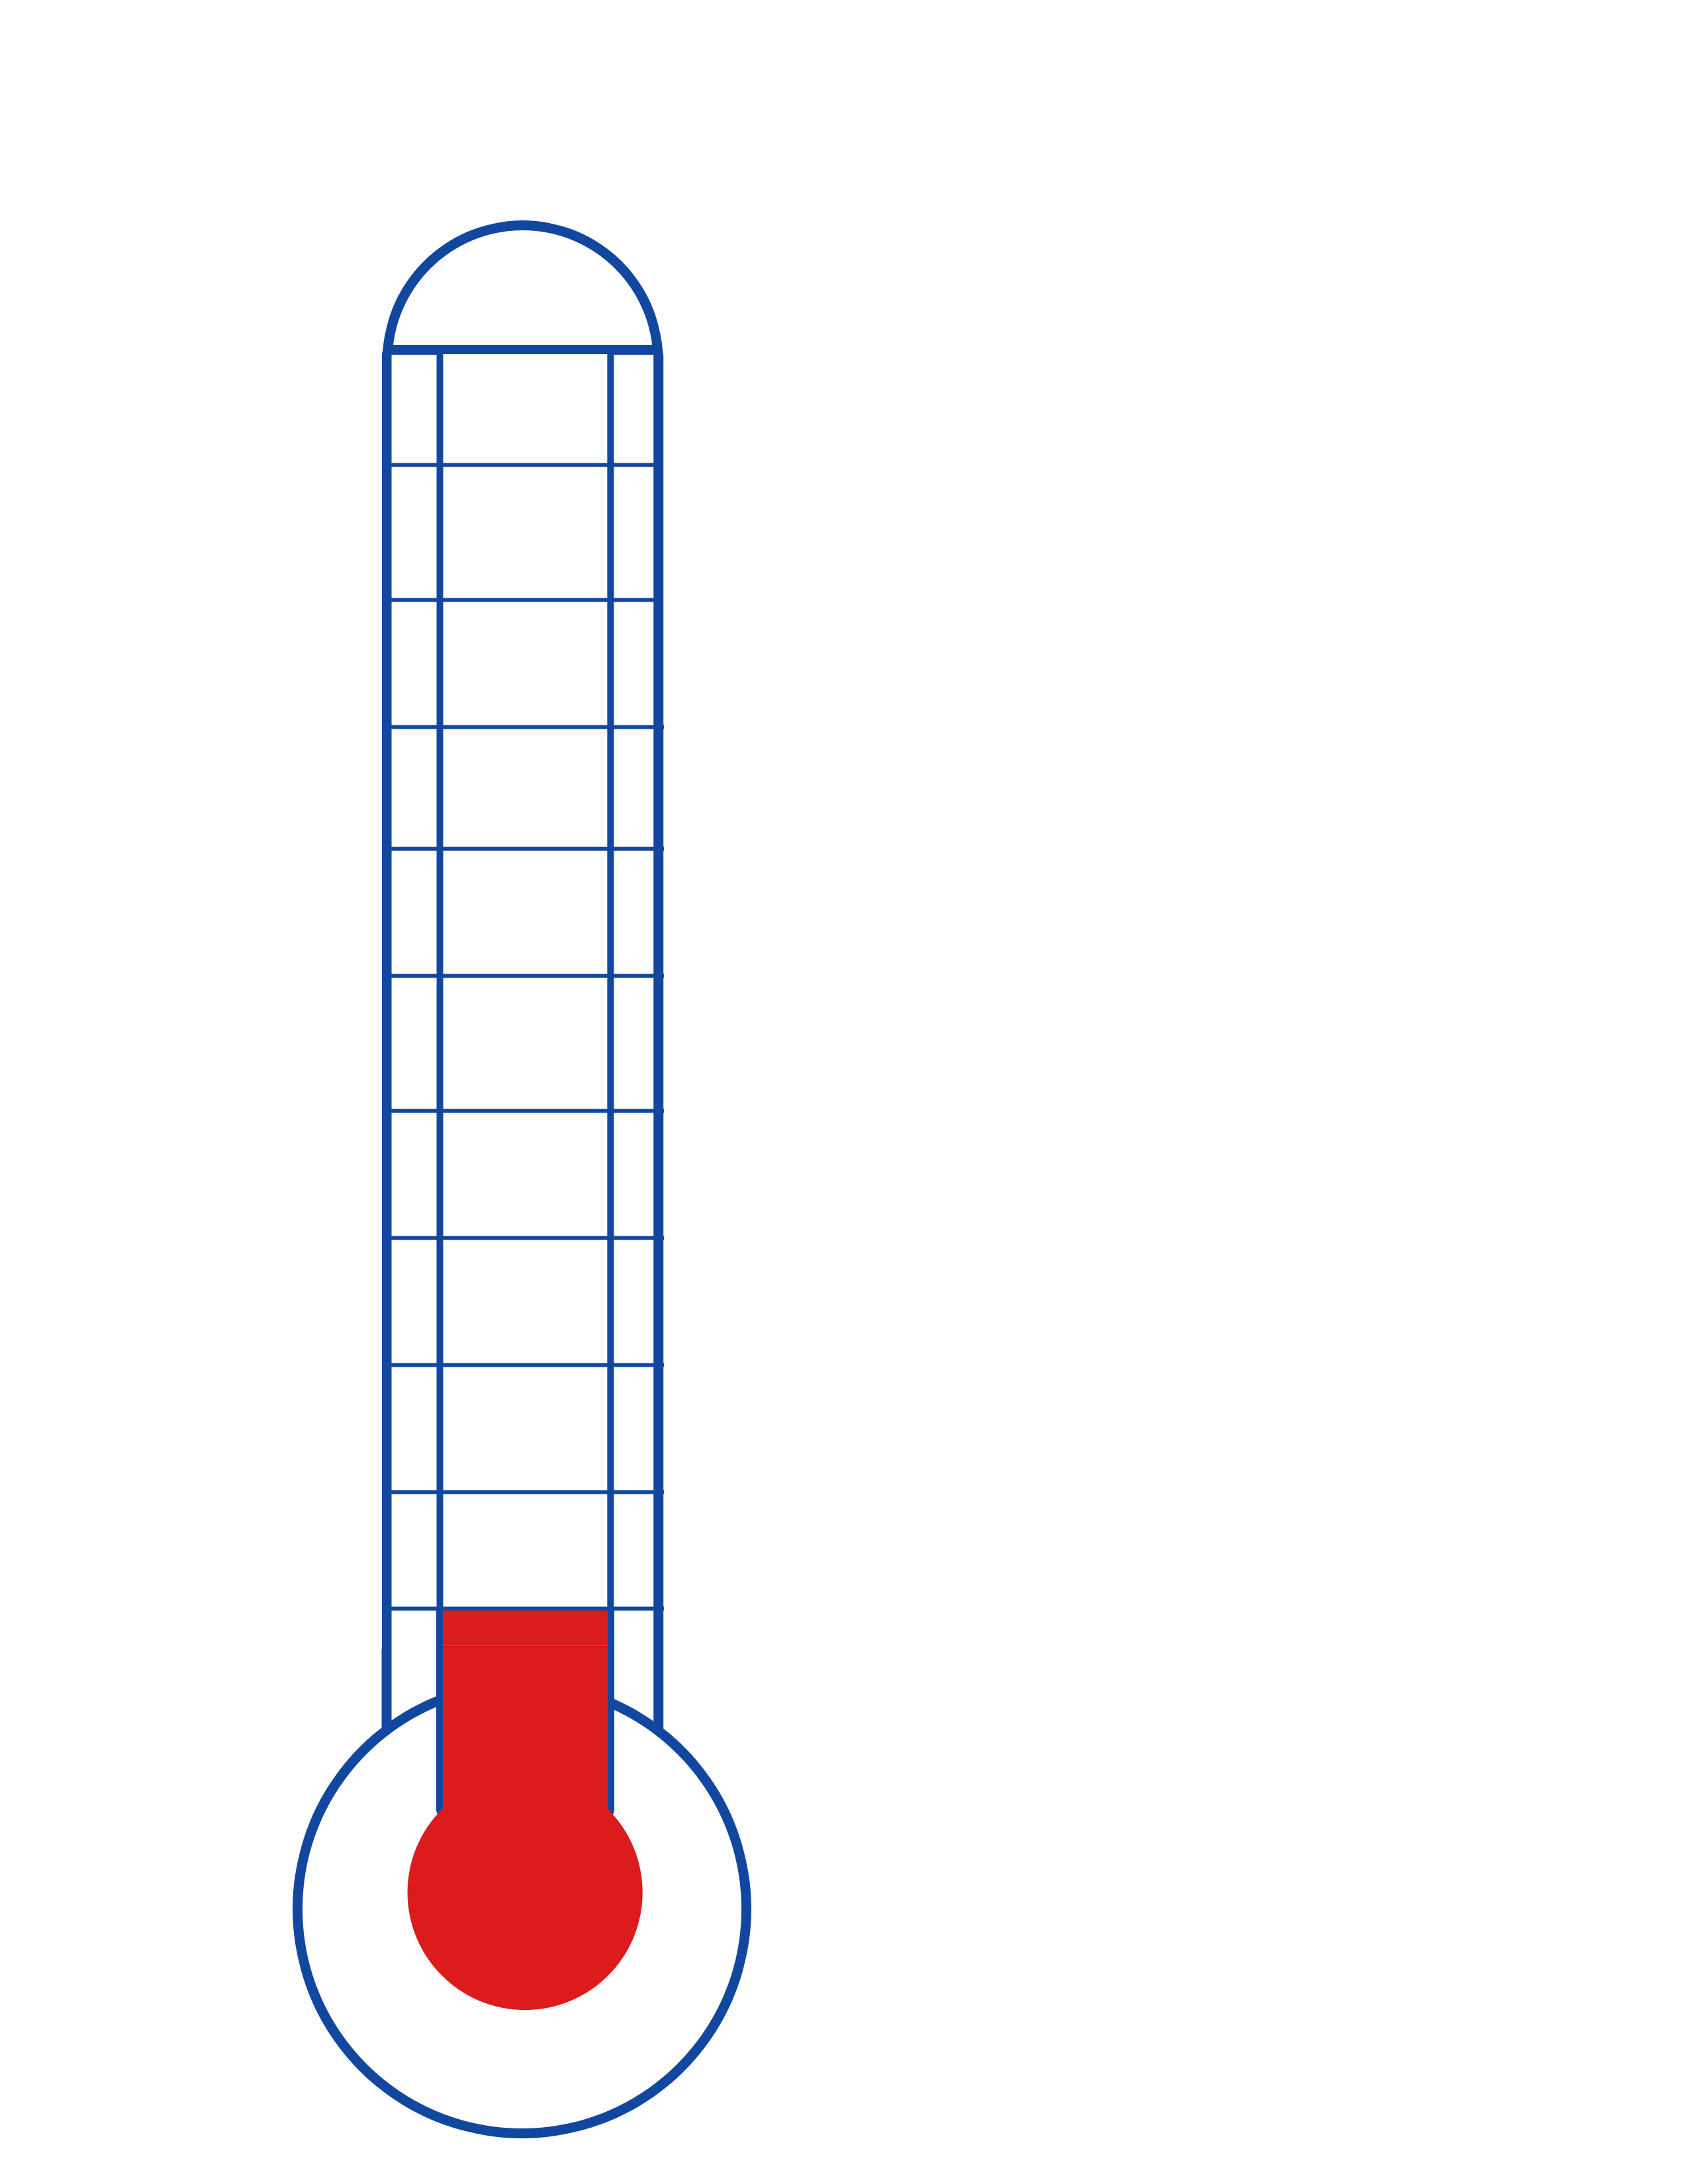 Exploding Thermometer Clip Art.